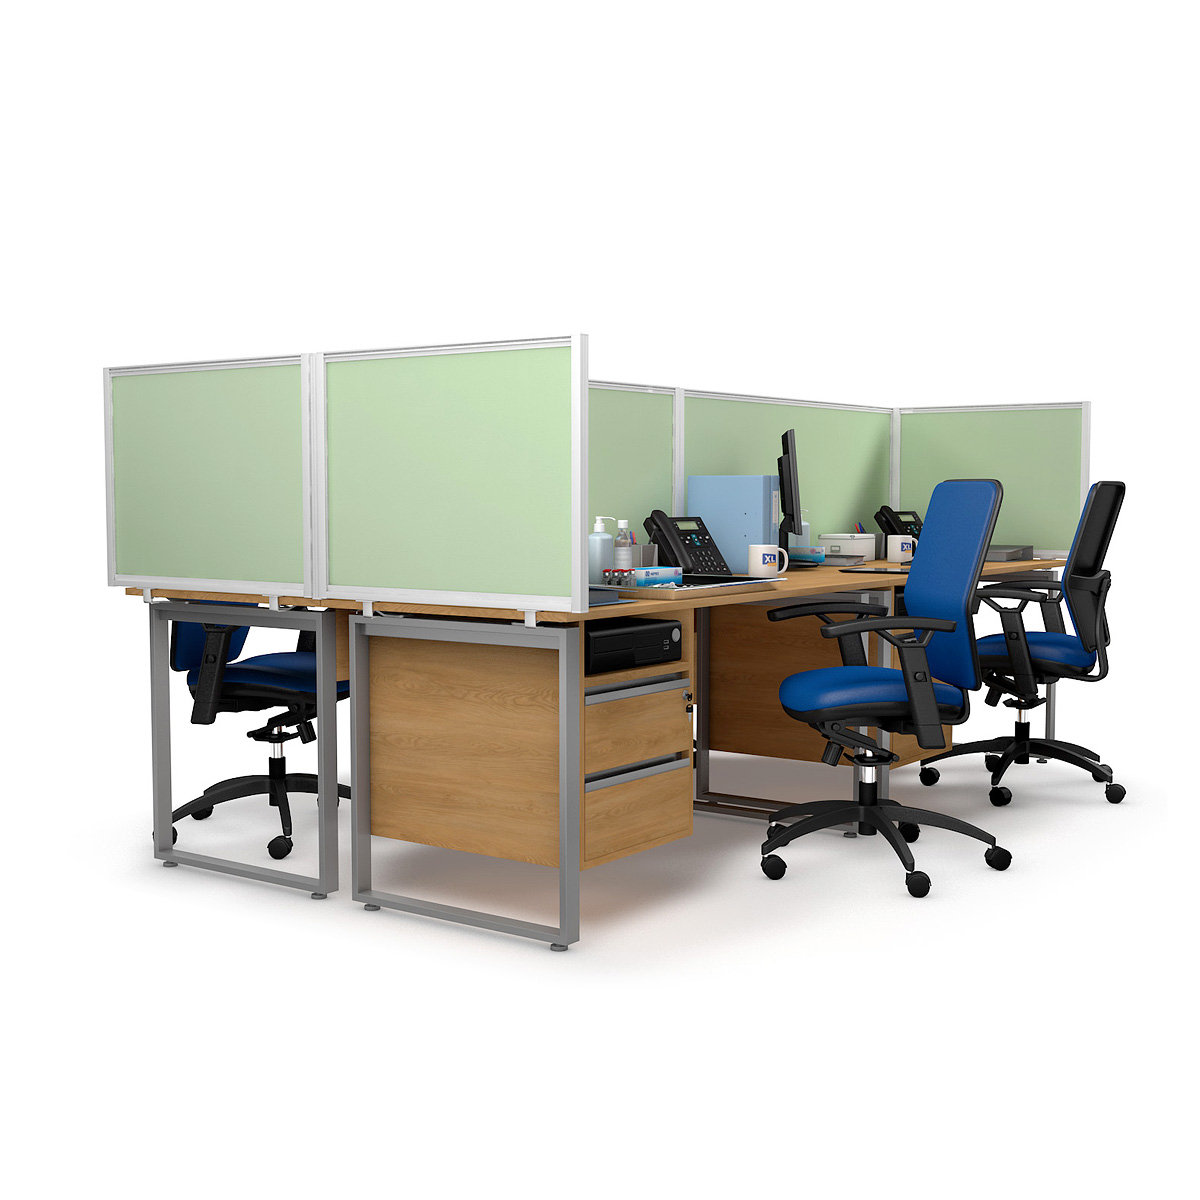 FRONTIER Medical Screens Anti-Microbial Desk Dividers